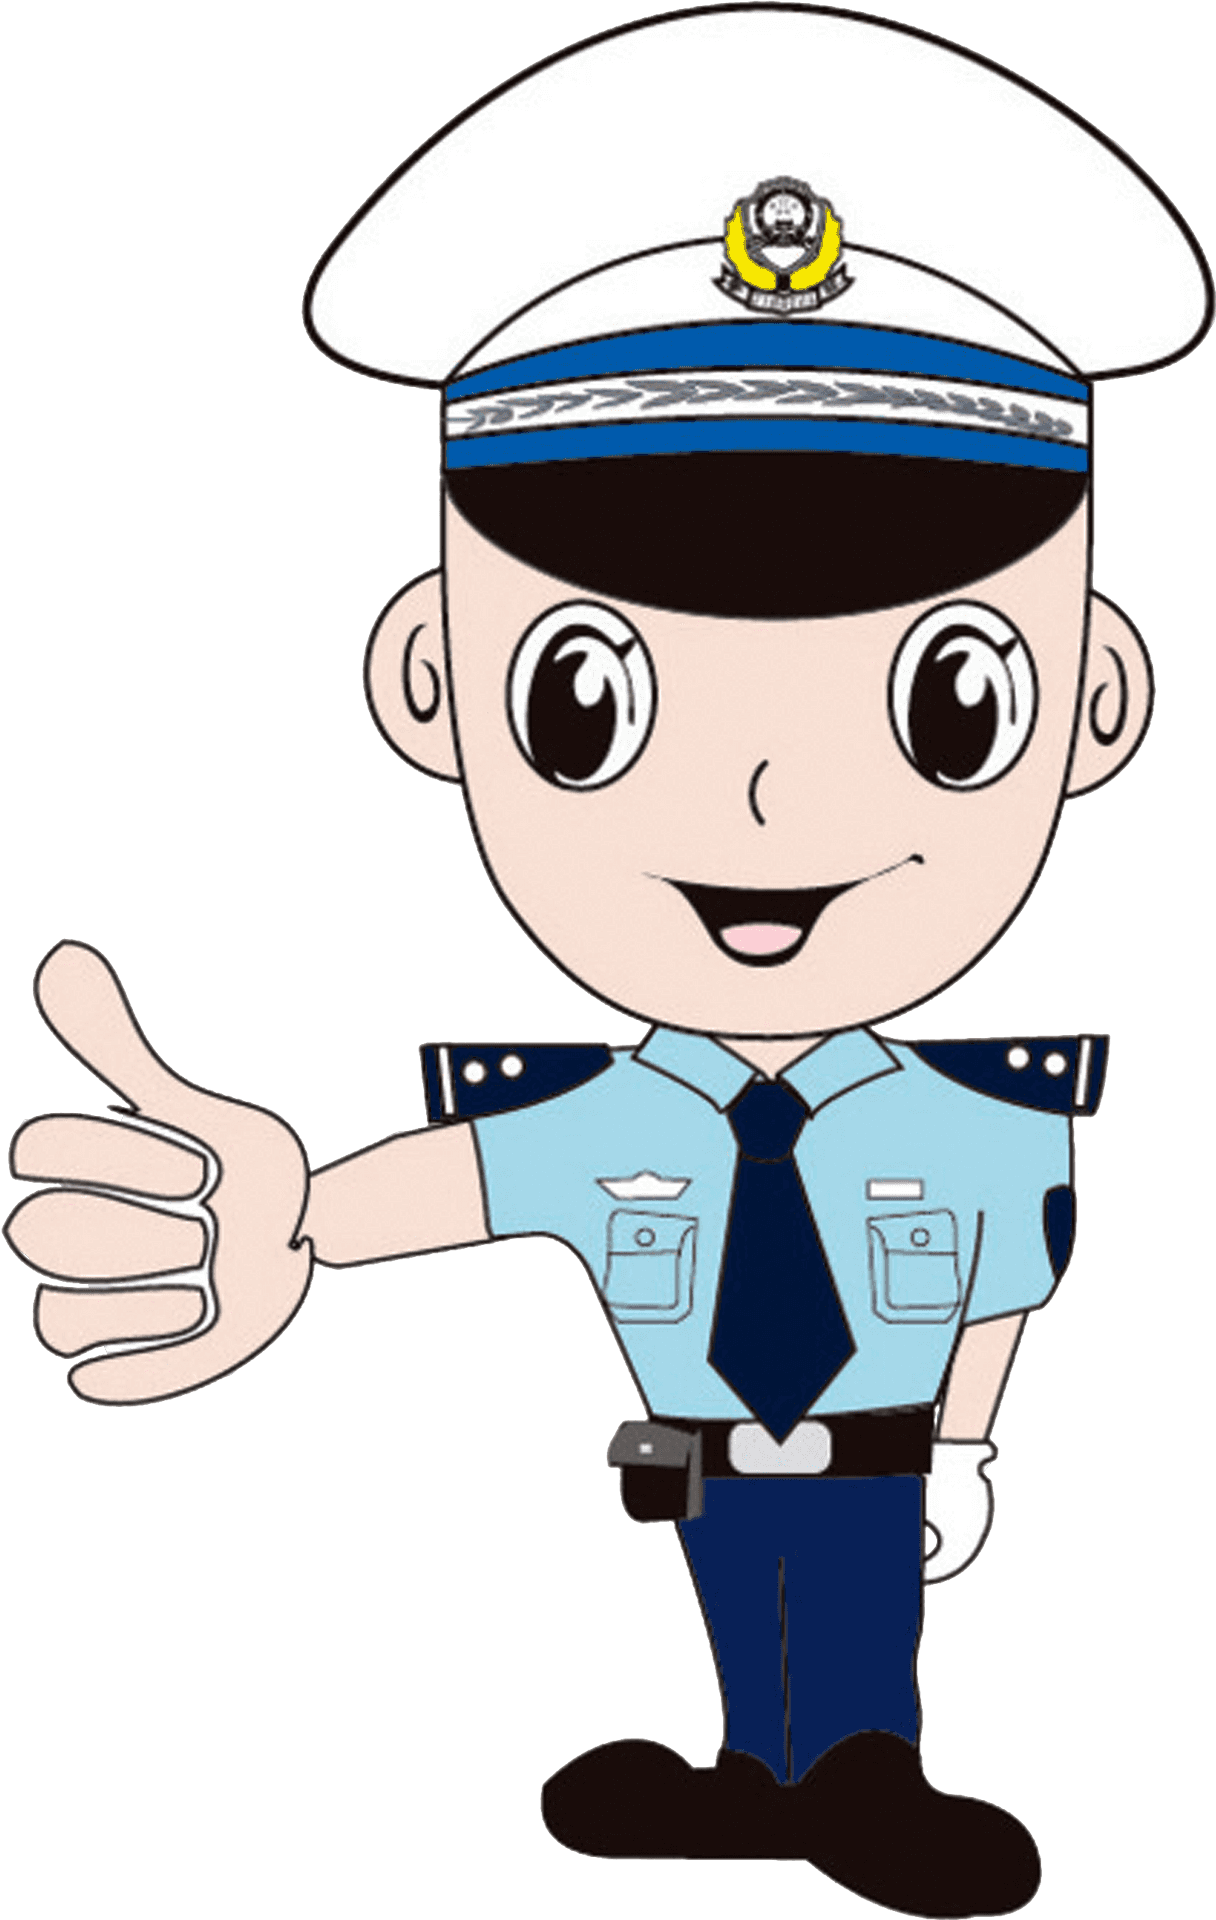 Friendly Cartoon Policeman Giving Thumbs Up PNG